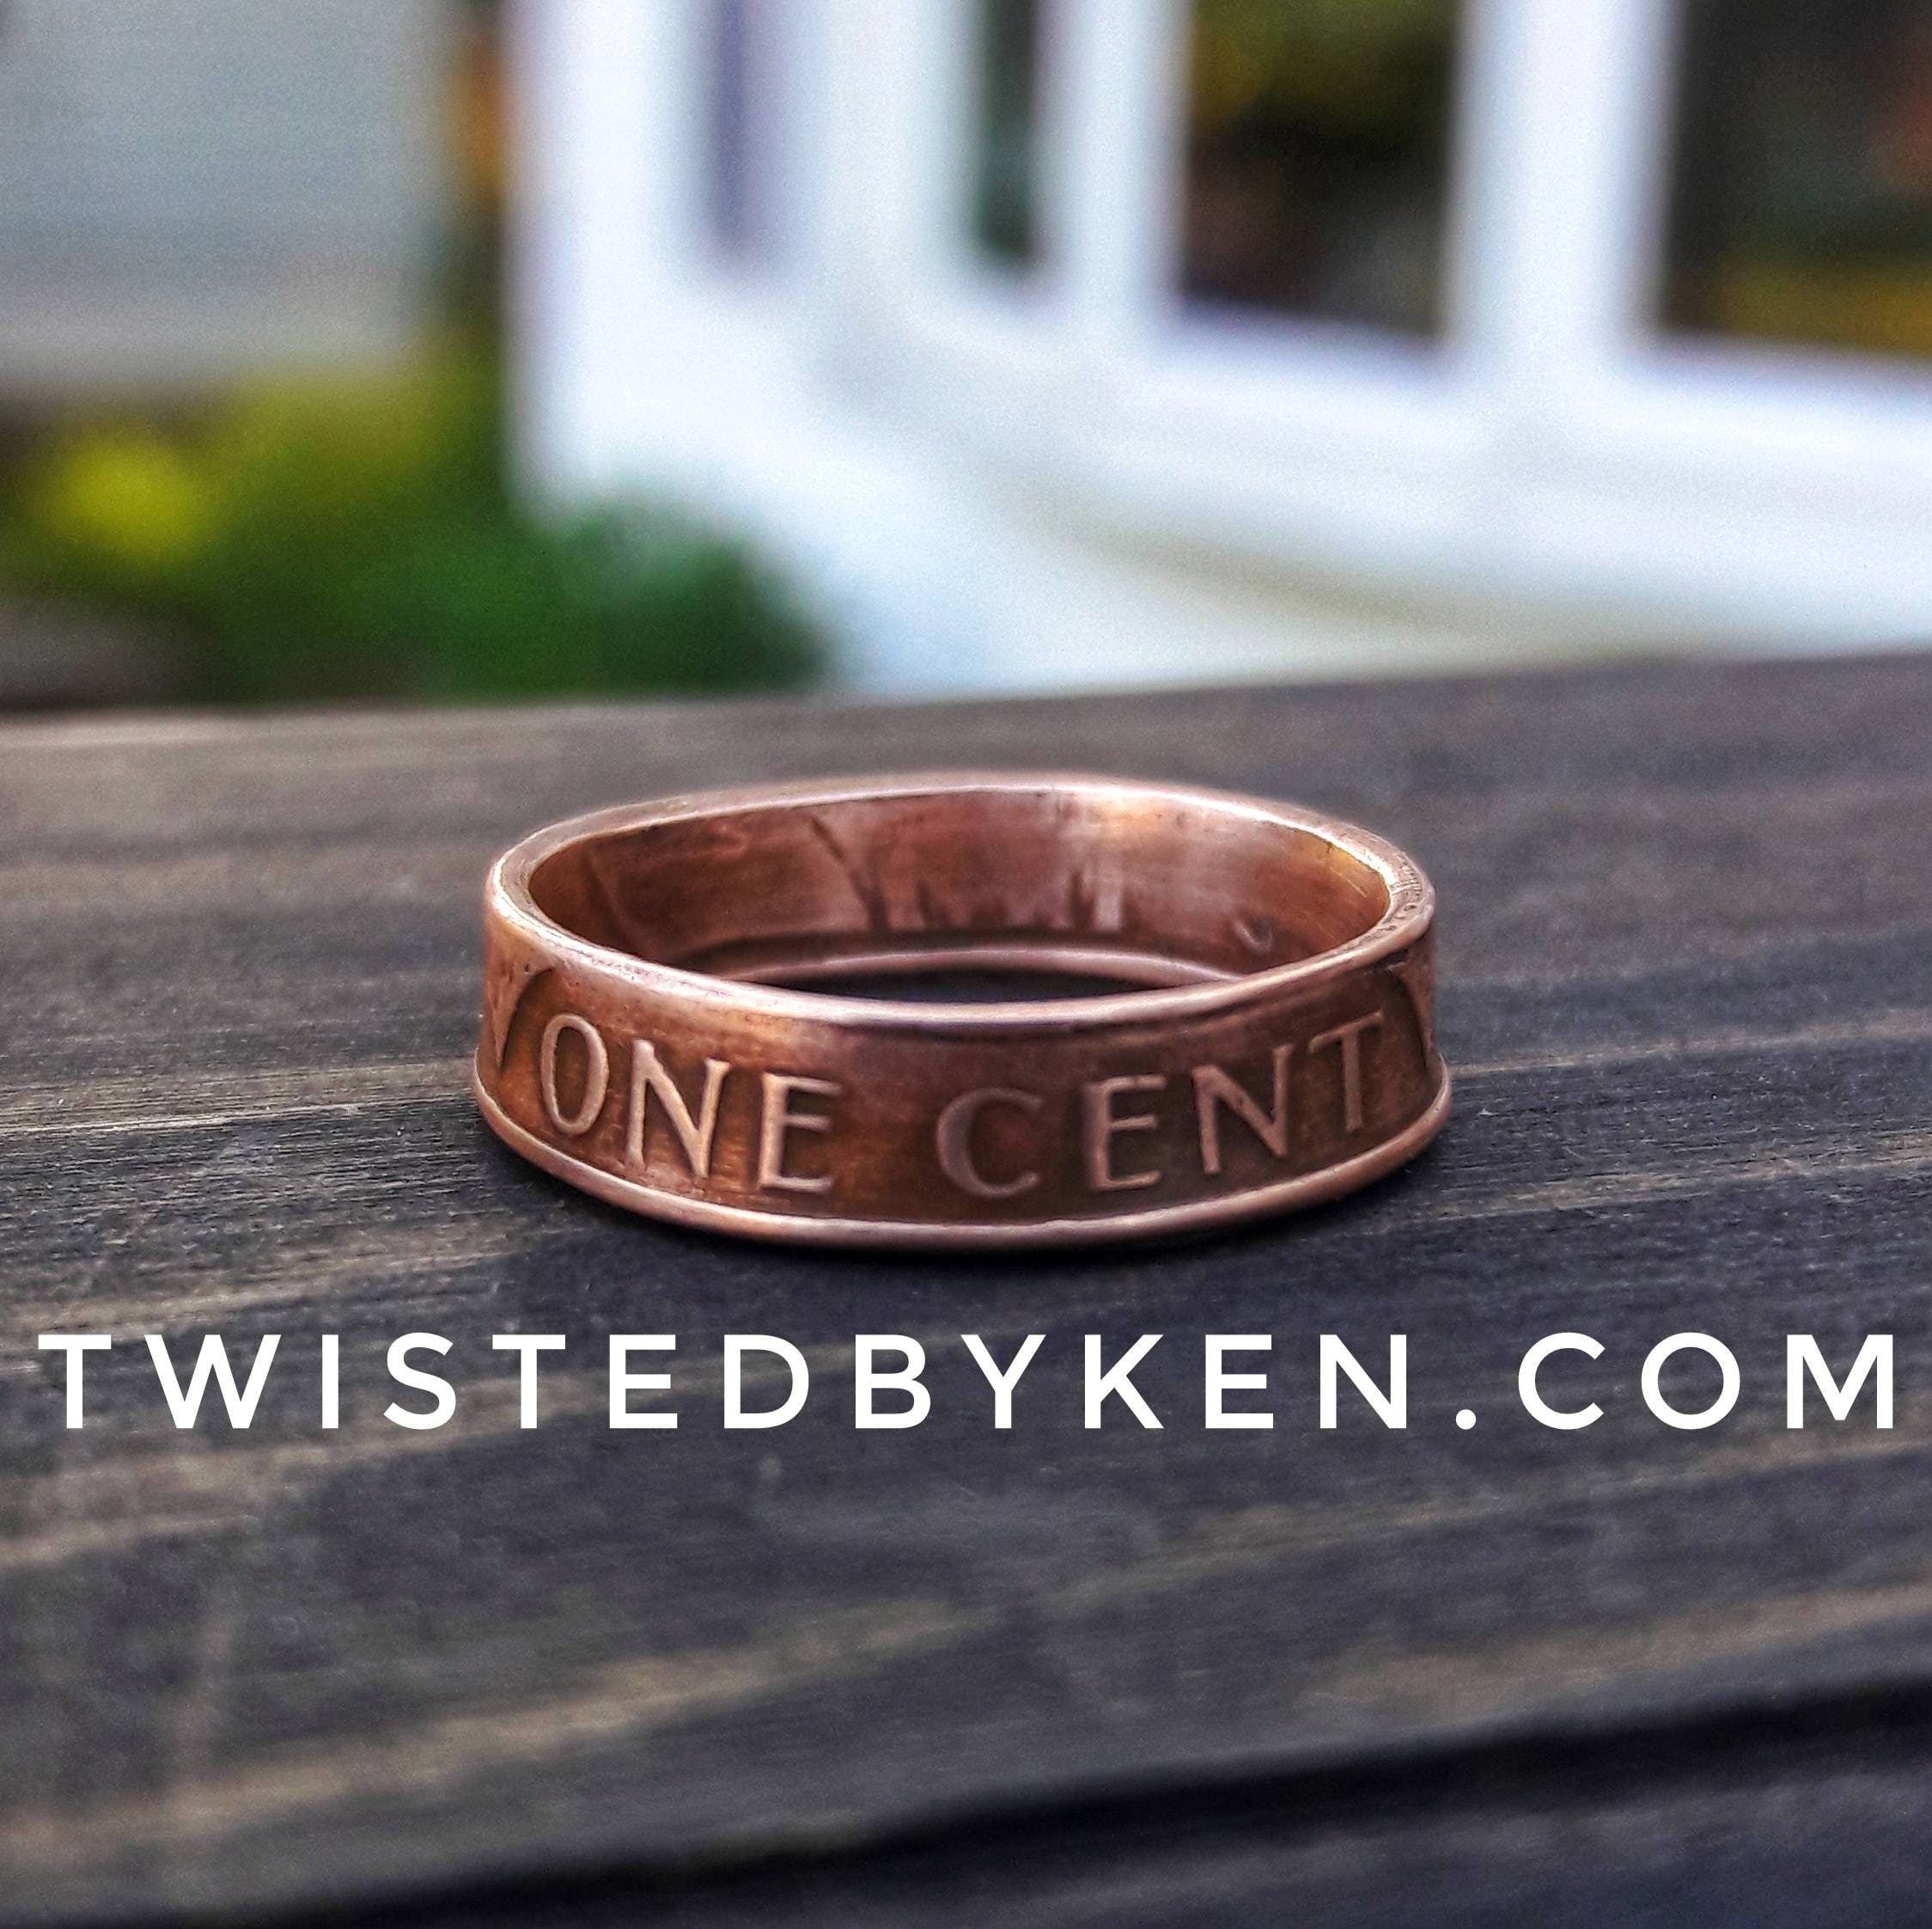 Single, Hammered-Copper Stacking Ring, Made From 16 Gauge Copper Wire,  Twisted By Ken, TBK020220